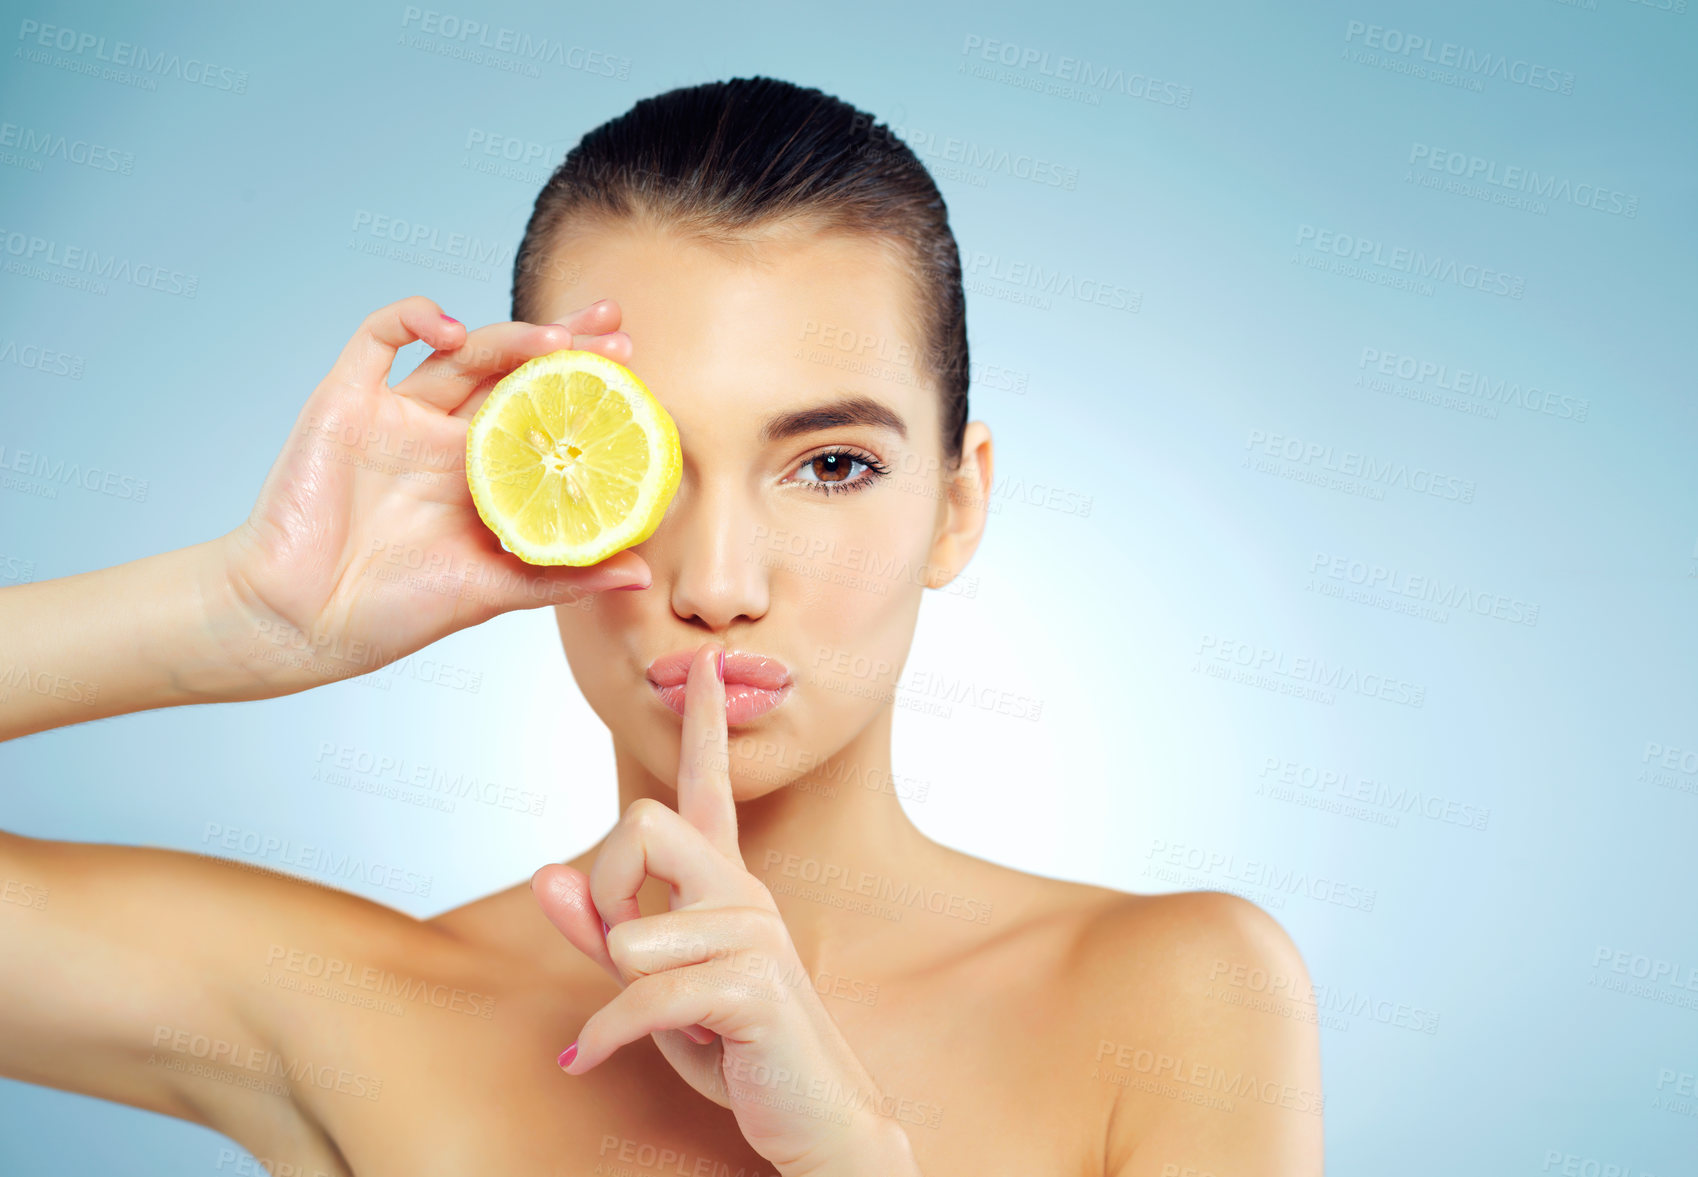 Buy stock photo Studio portrait of a beautiful young woman covering her eye with a lemon and putting her finger to her lips